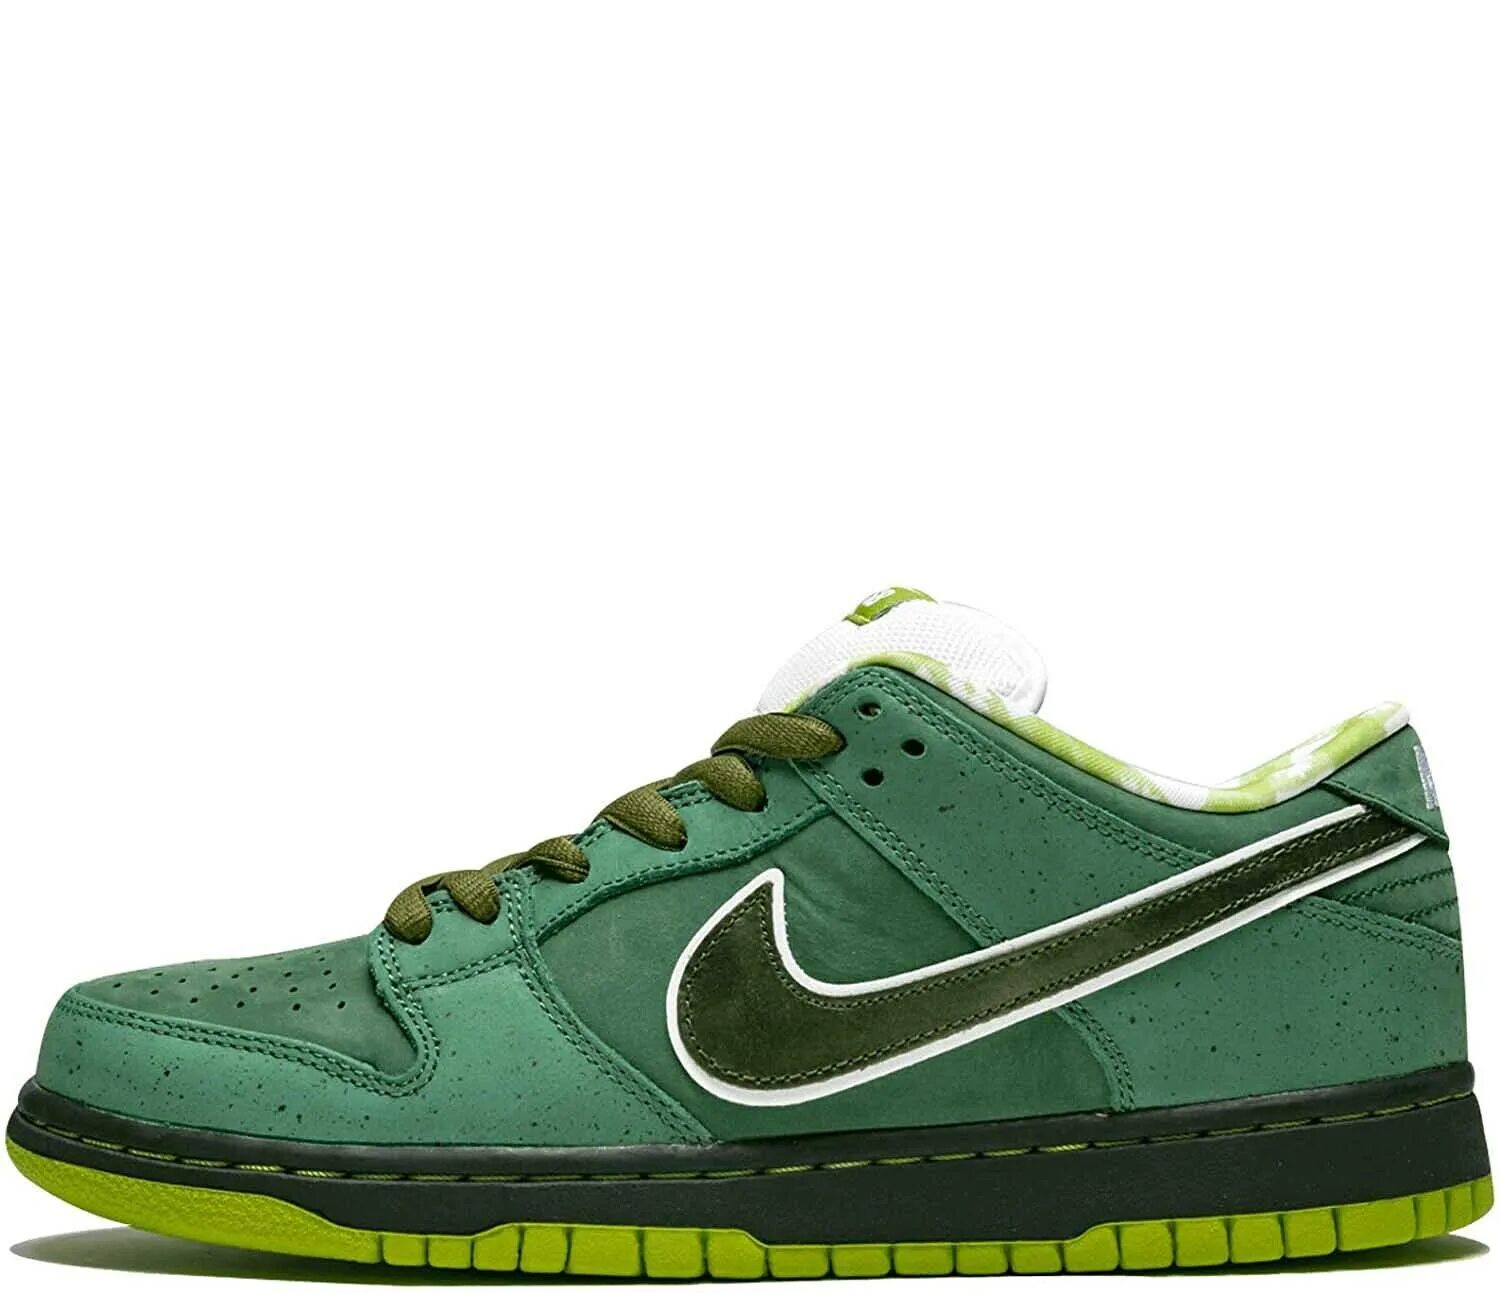 Nike SB Dunk Low Green. Nike SB Dunk. Nike SB Dunk Low. Nike SB Dunk Low Pro. Кроссовки найк dunk low